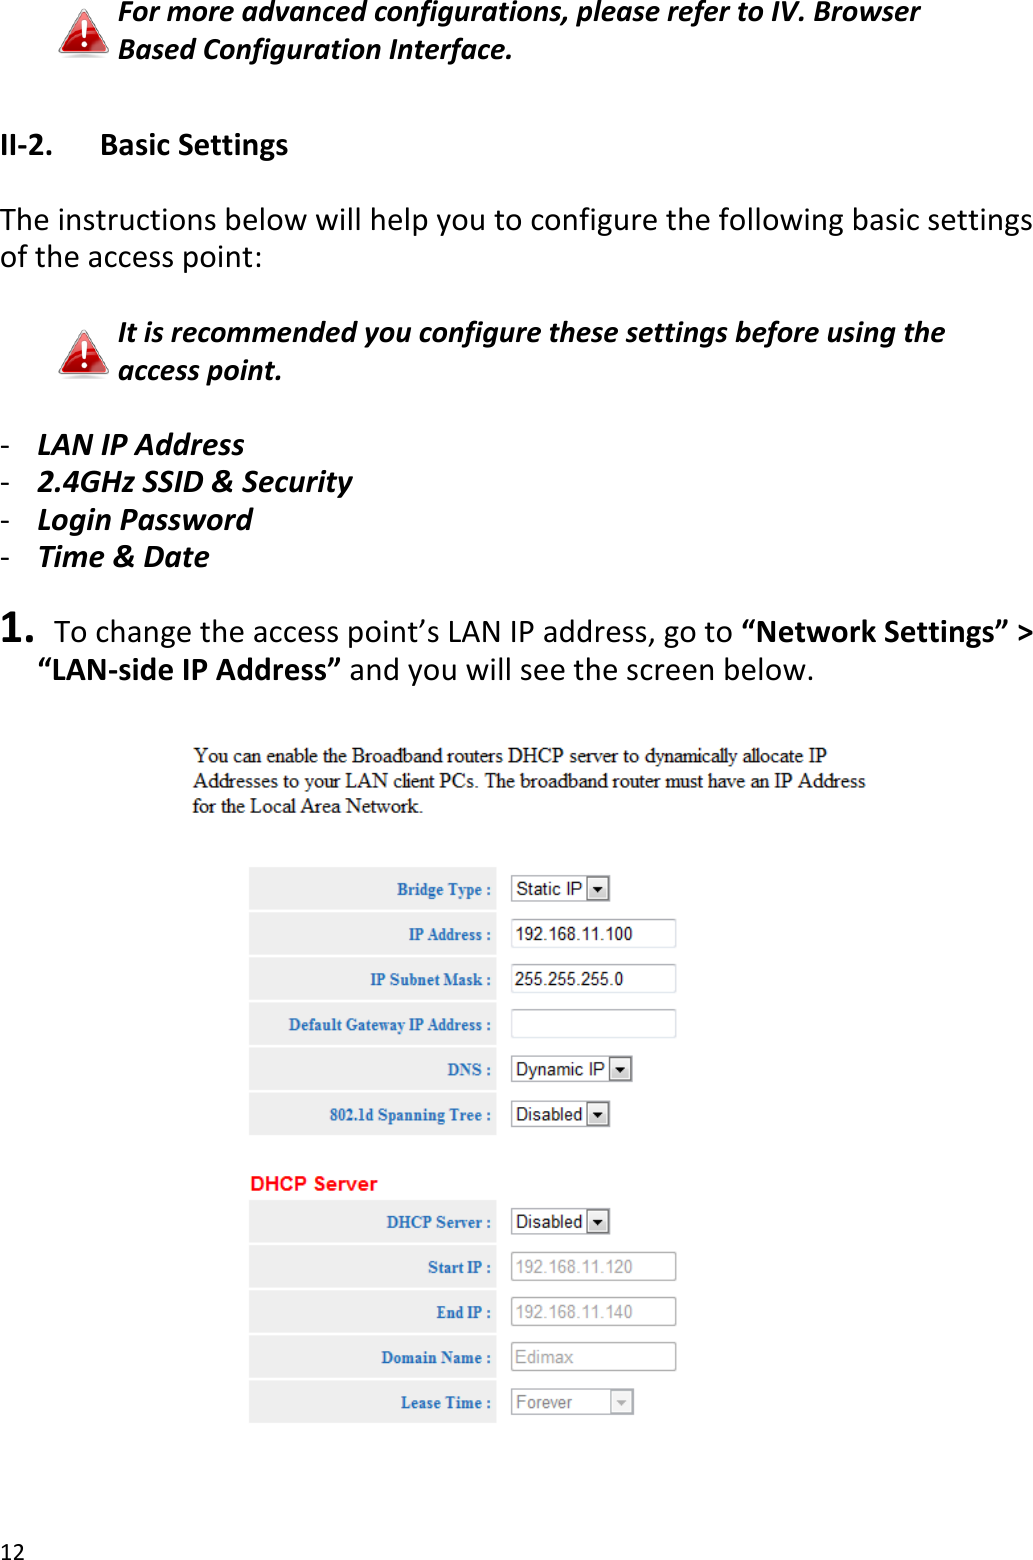 12  For more advanced configurations, please refer to IV. Browser Based Configuration Interface.  II-2.  Basic Settings  The instructions below will help you to configure the following basic settings of the access point:  It is recommended you configure these settings before using the access point.  - LAN IP Address - 2.4GHz SSID &amp; Security - Login Password - Time &amp; Date  1.  To change the access point’s LAN IP address, go to “Network Settings” &gt; “LAN-side IP Address” and you will see the screen below.    